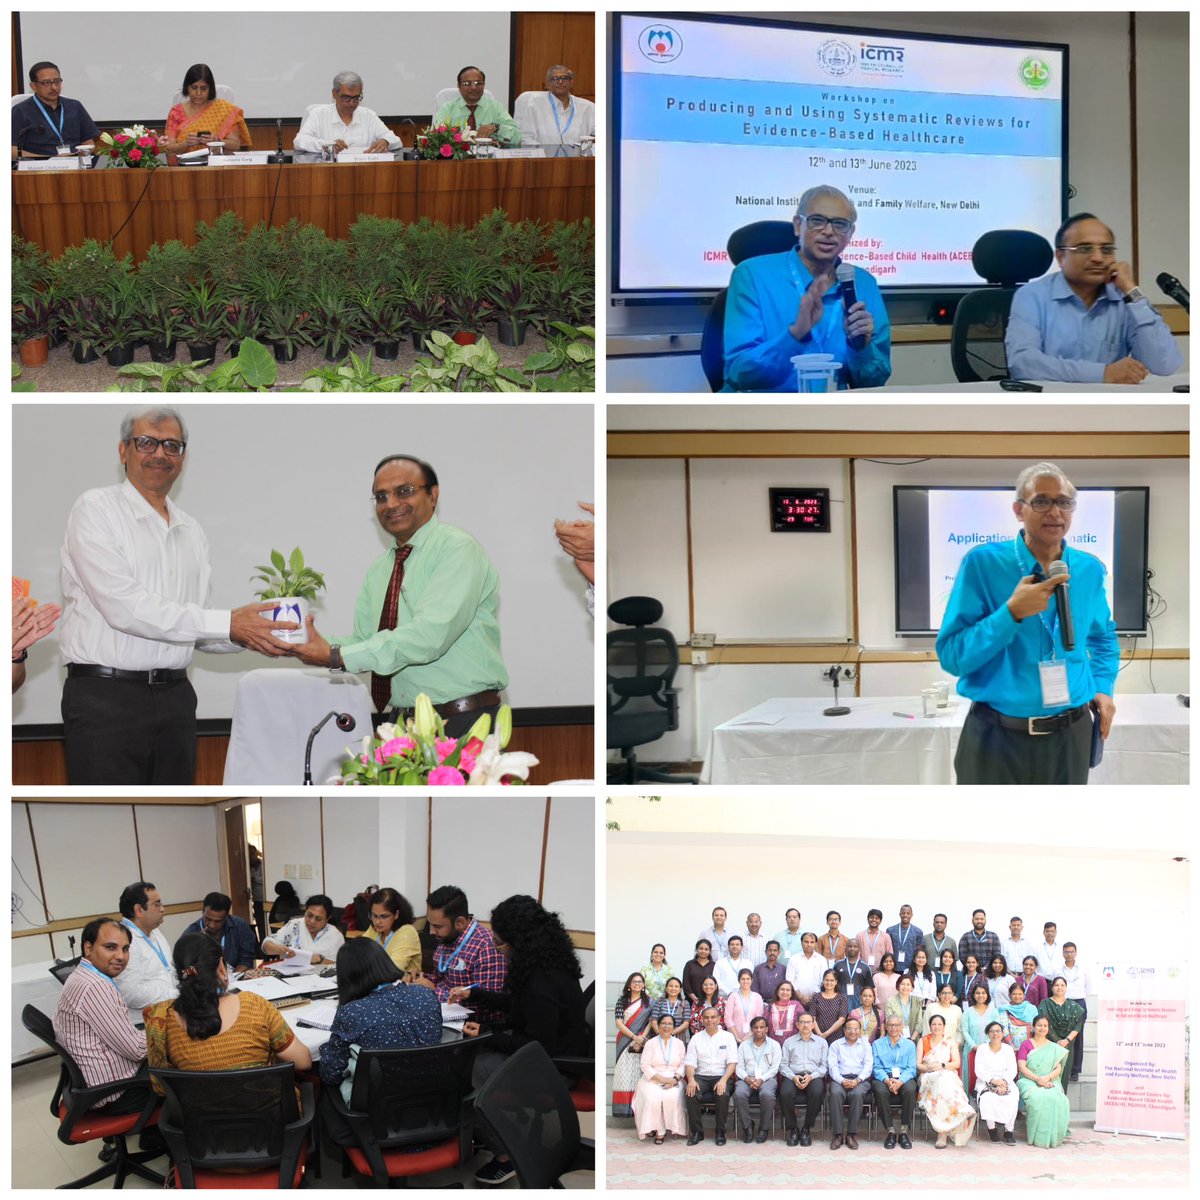 Evidence should feed the guidelines for health interventions. NIHFW & ICMR ACEBCH PGI Chandigarh organized a unique workshop 'Using and Producing Systematic Reviews for Evidence-based Healthcare' for faculty, research staff and students of NIHFW and @ICMRDELHI  on 12-13.06.2023.